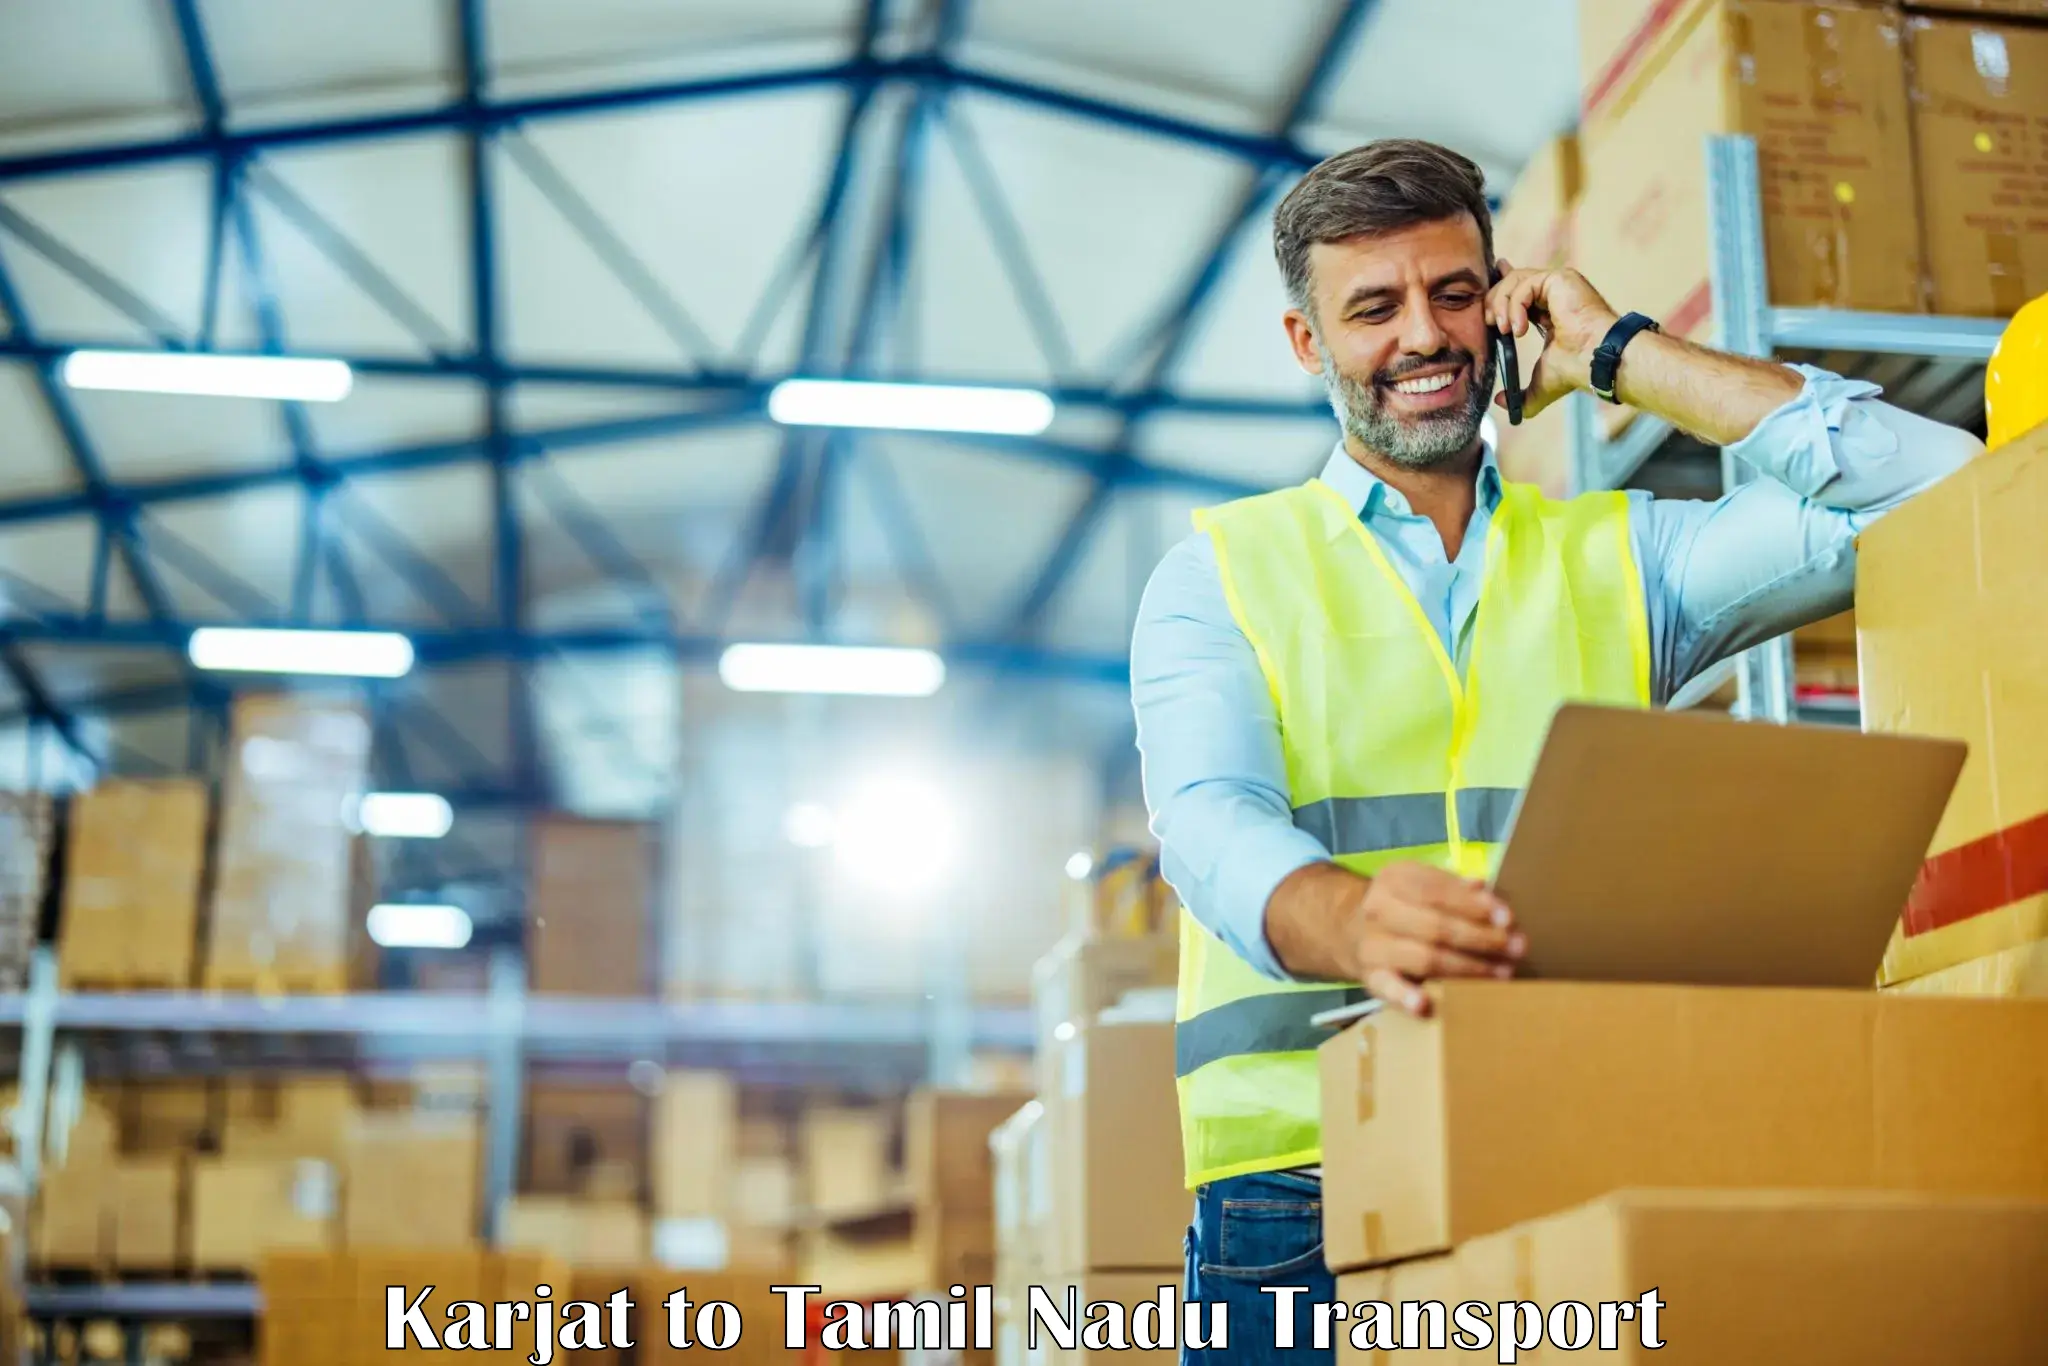 Commercial transport service Karjat to Chengam